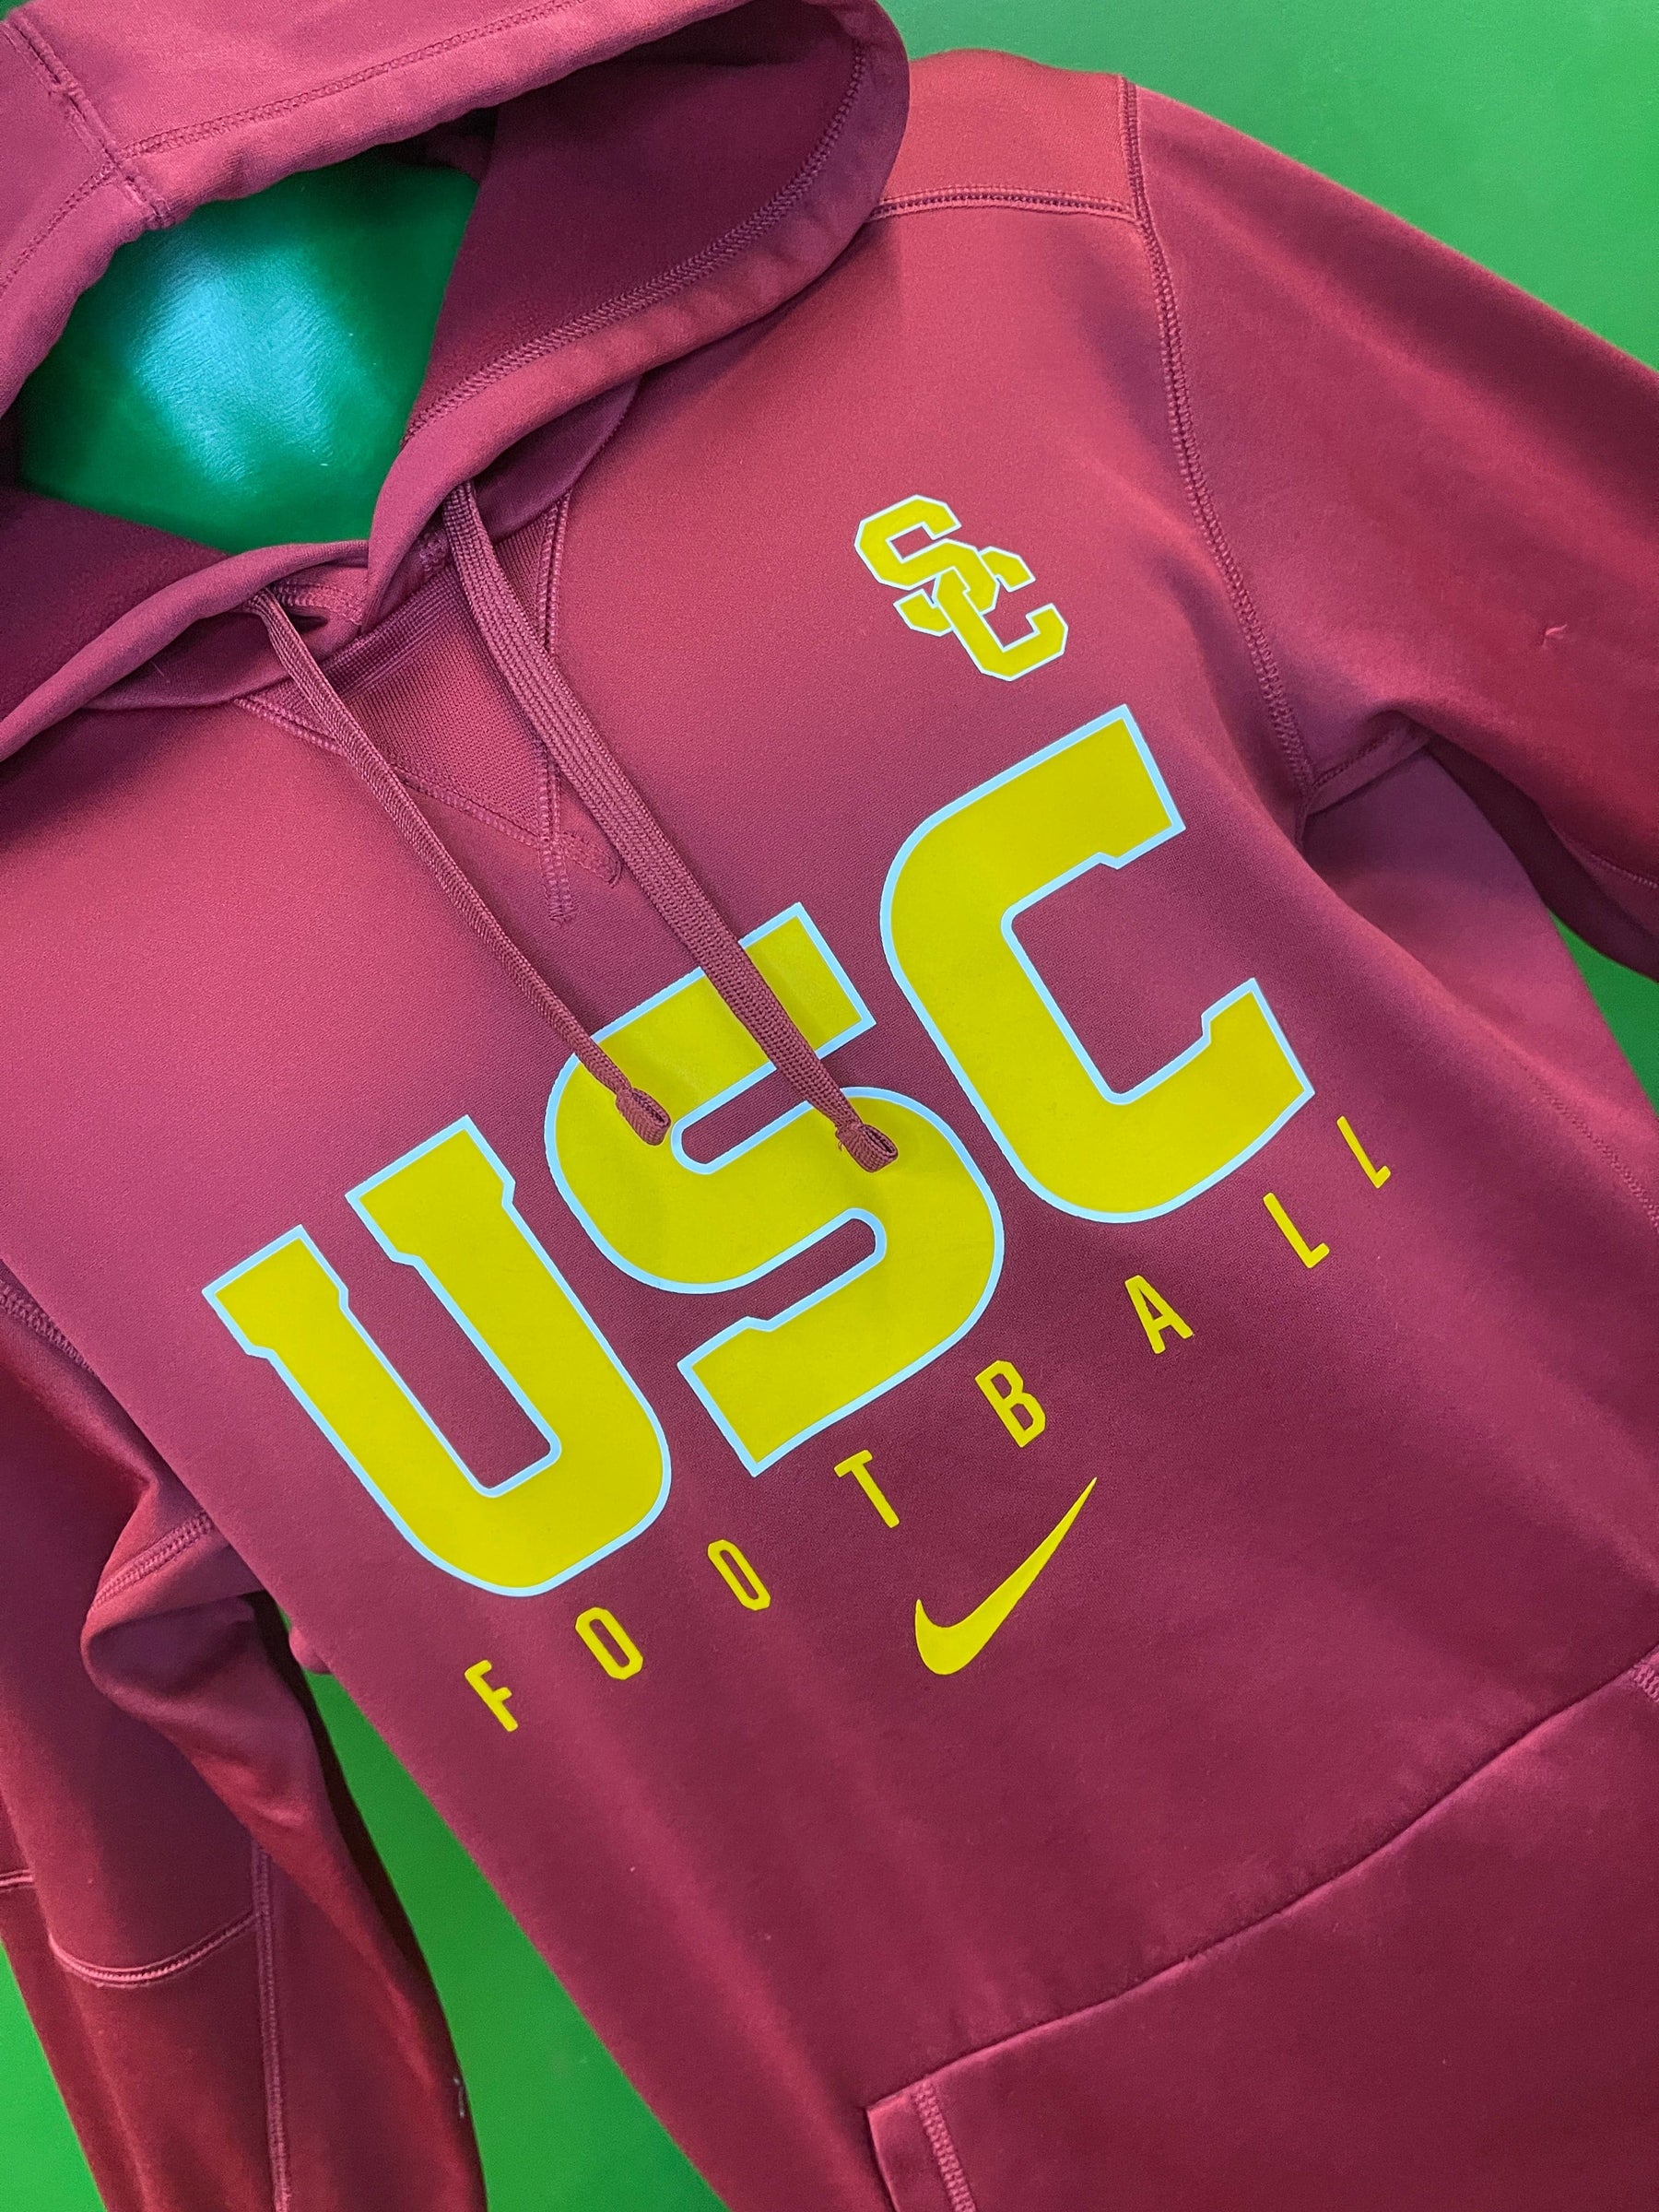 NCAA USC Trojans Therma-Fit Pullover Hoodie Men's Small